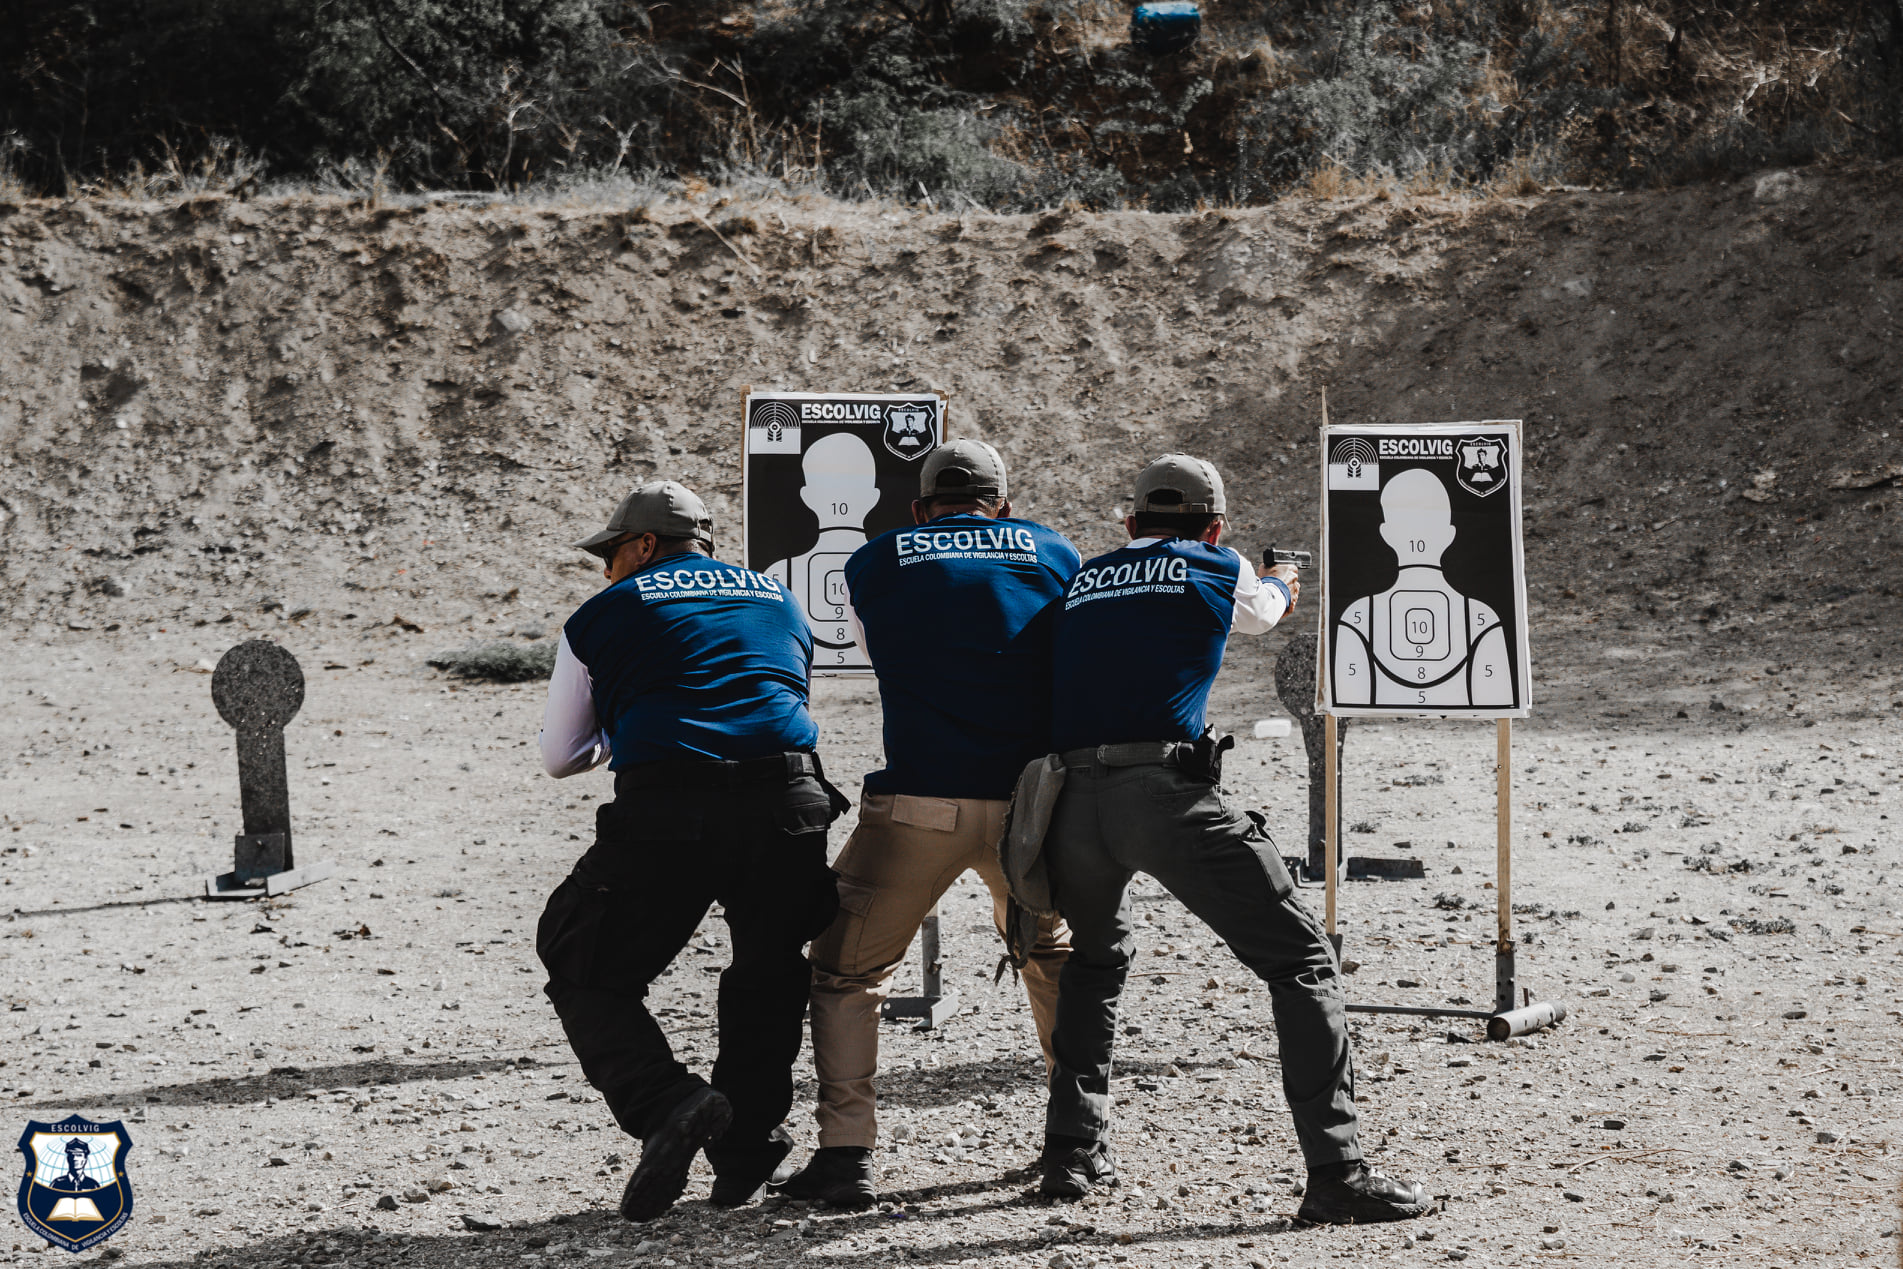 Armed close protection training in Europe